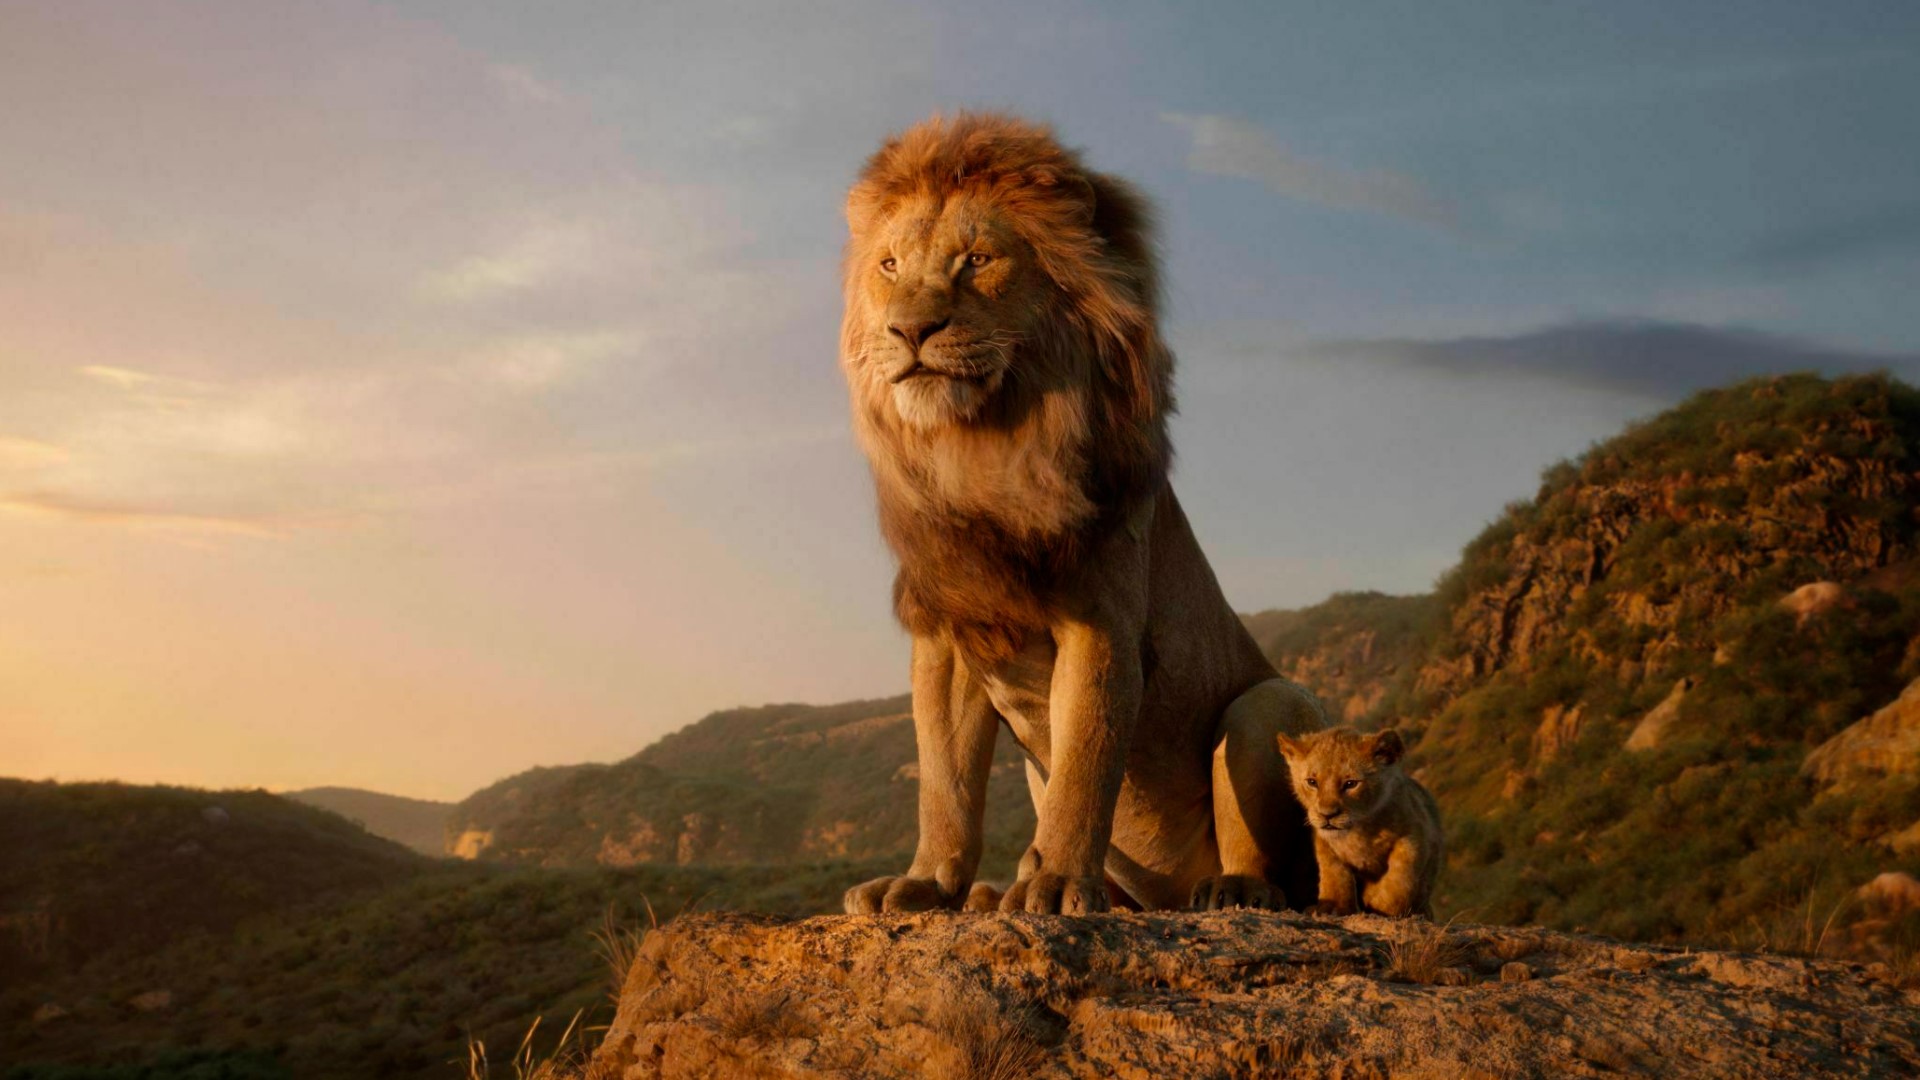 Since the original The Lion King was first released 25 years ago, half of the Africa’s lions have been lost. John Ball Zoo and Celebration Cinema are teaming up to help lions. The partnership coincides with the release of "The Lion King" movie and Lion Day at John Ball Zoo.